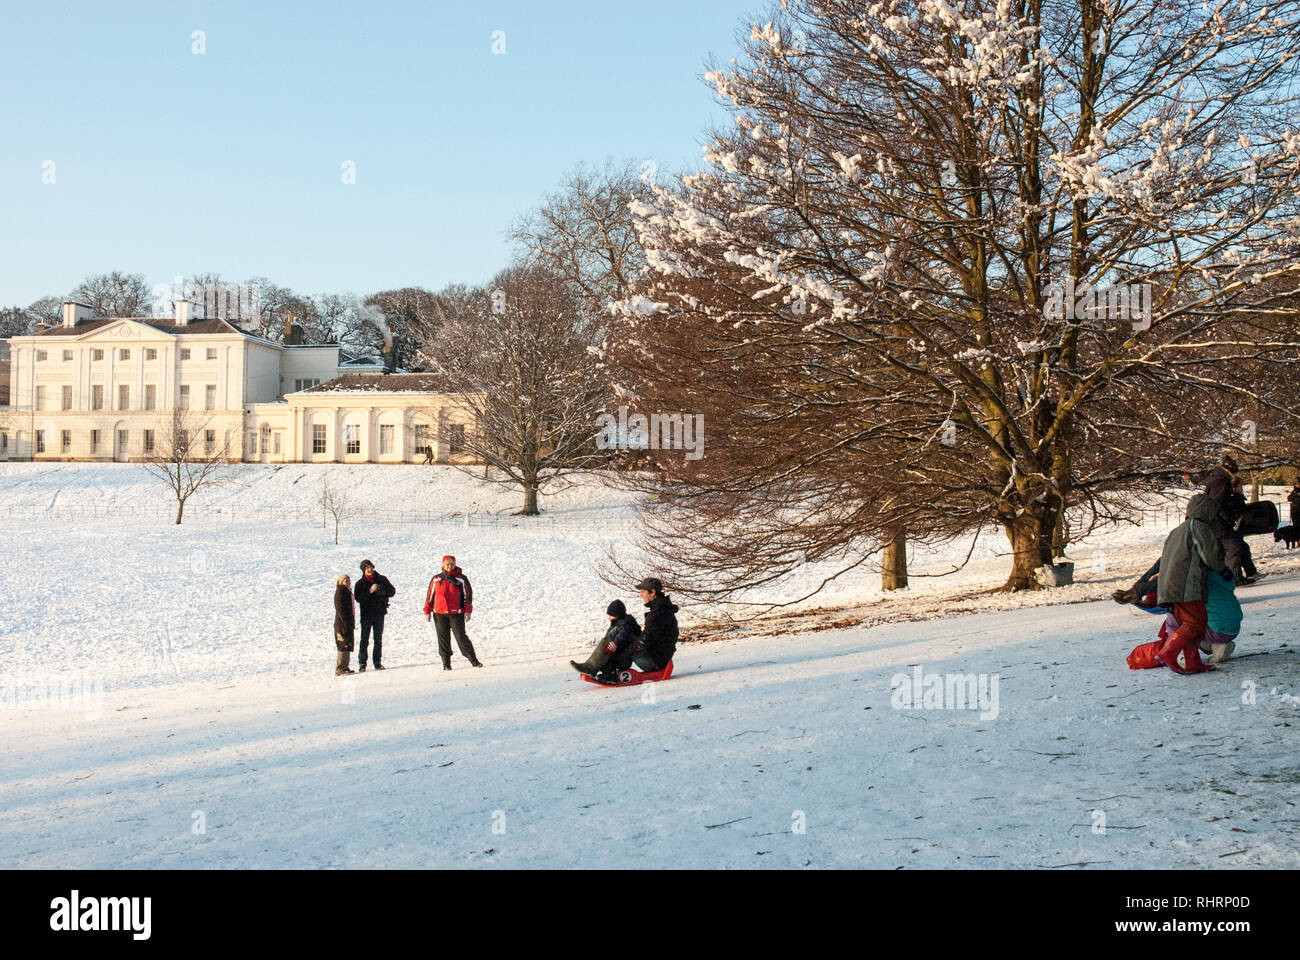 On a snowy winters day families sledge down slopes in front of Kenwood House, Hampstead, UK. Stock Photo